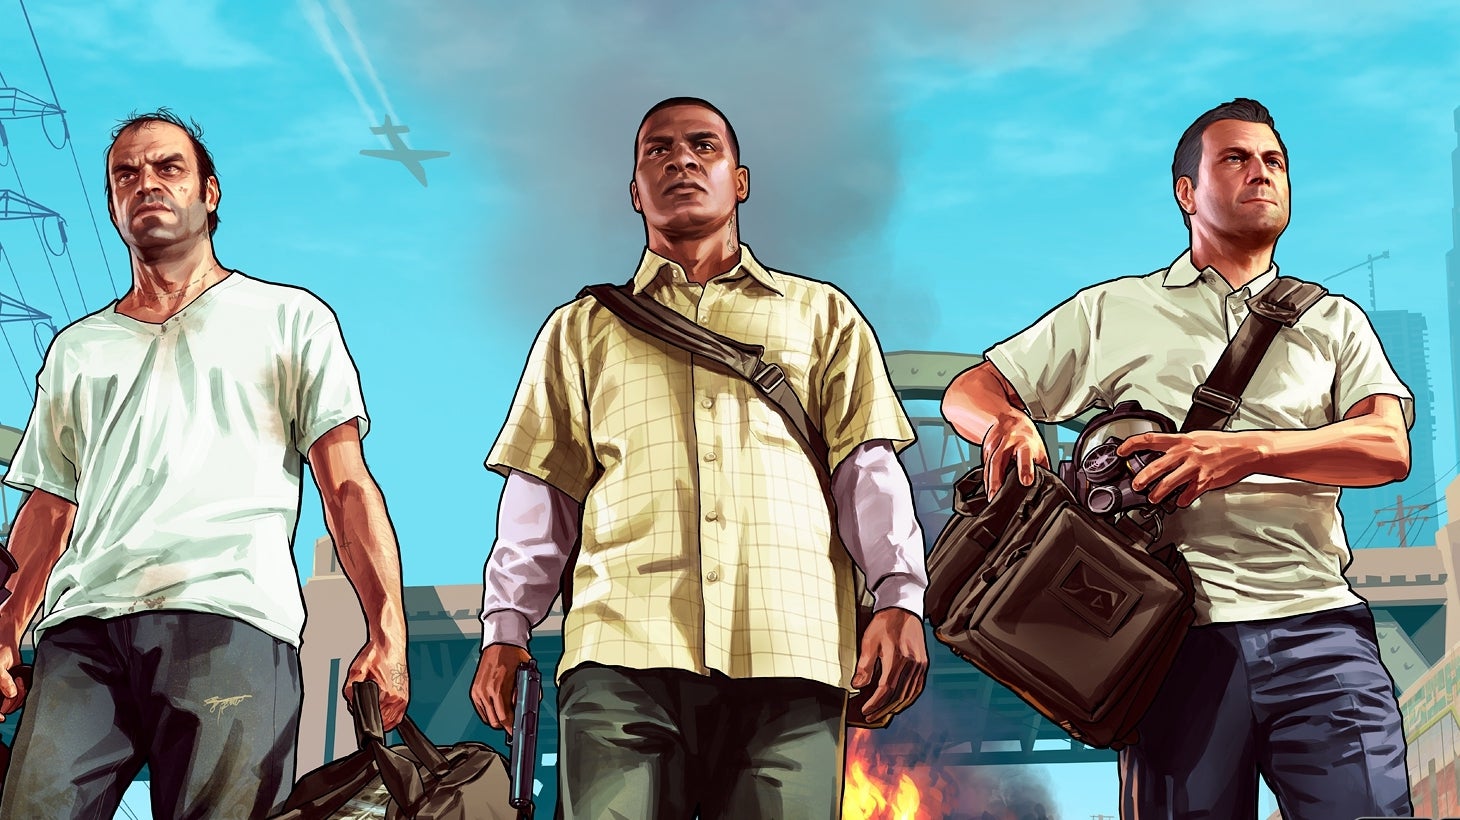 Image for US judge agrees to block Grand Theft Auto 5 cheat programs